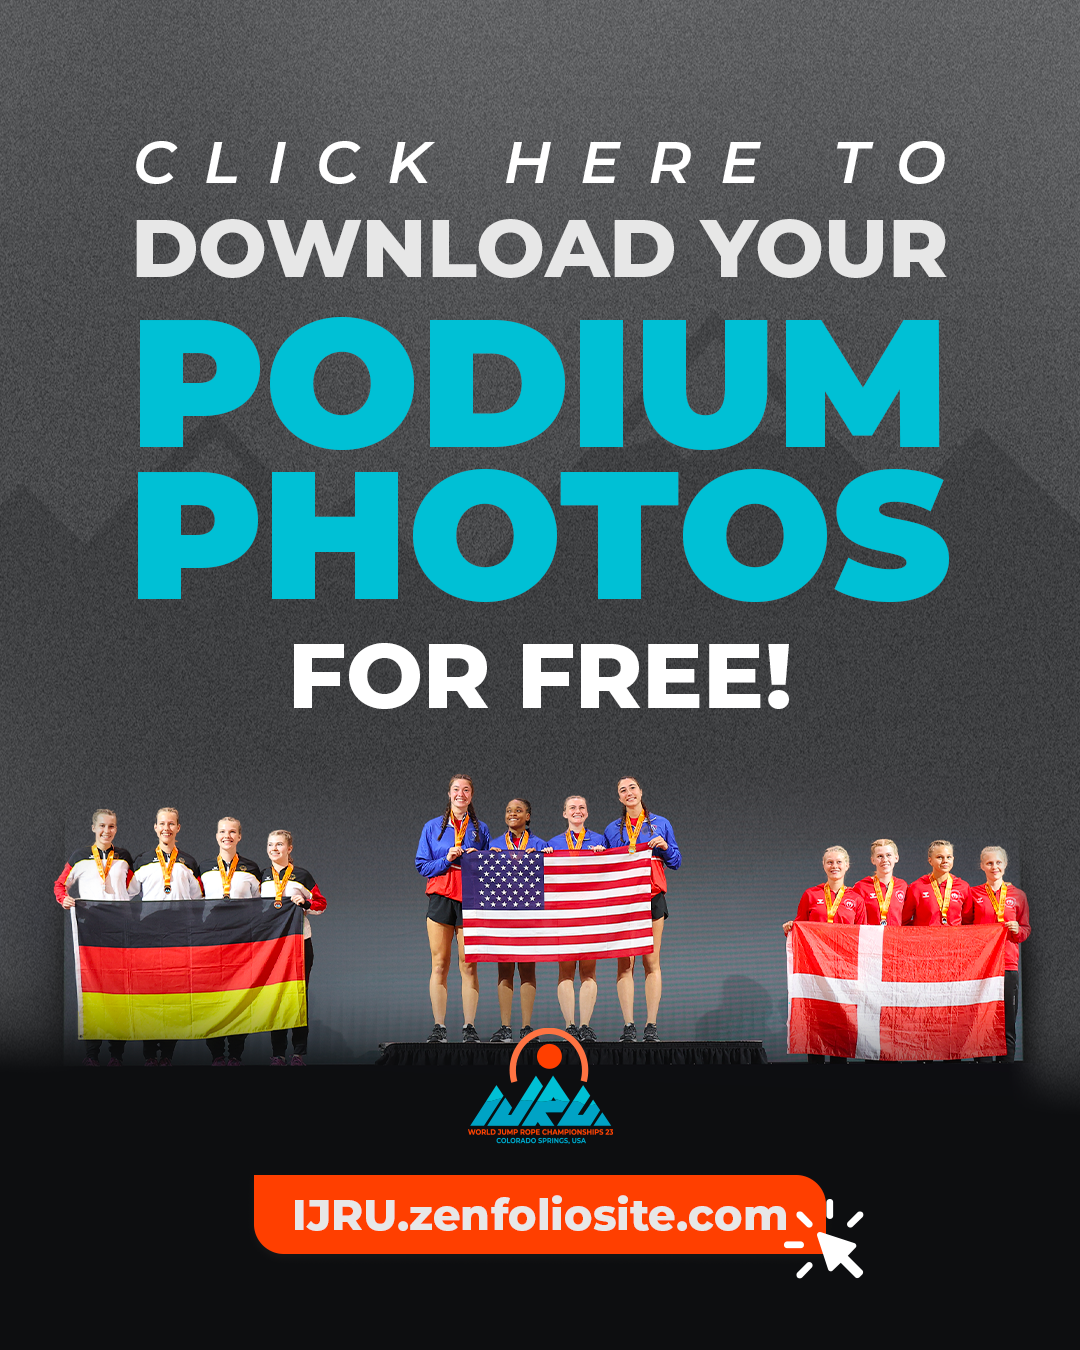  click here to download your podium photos for free 